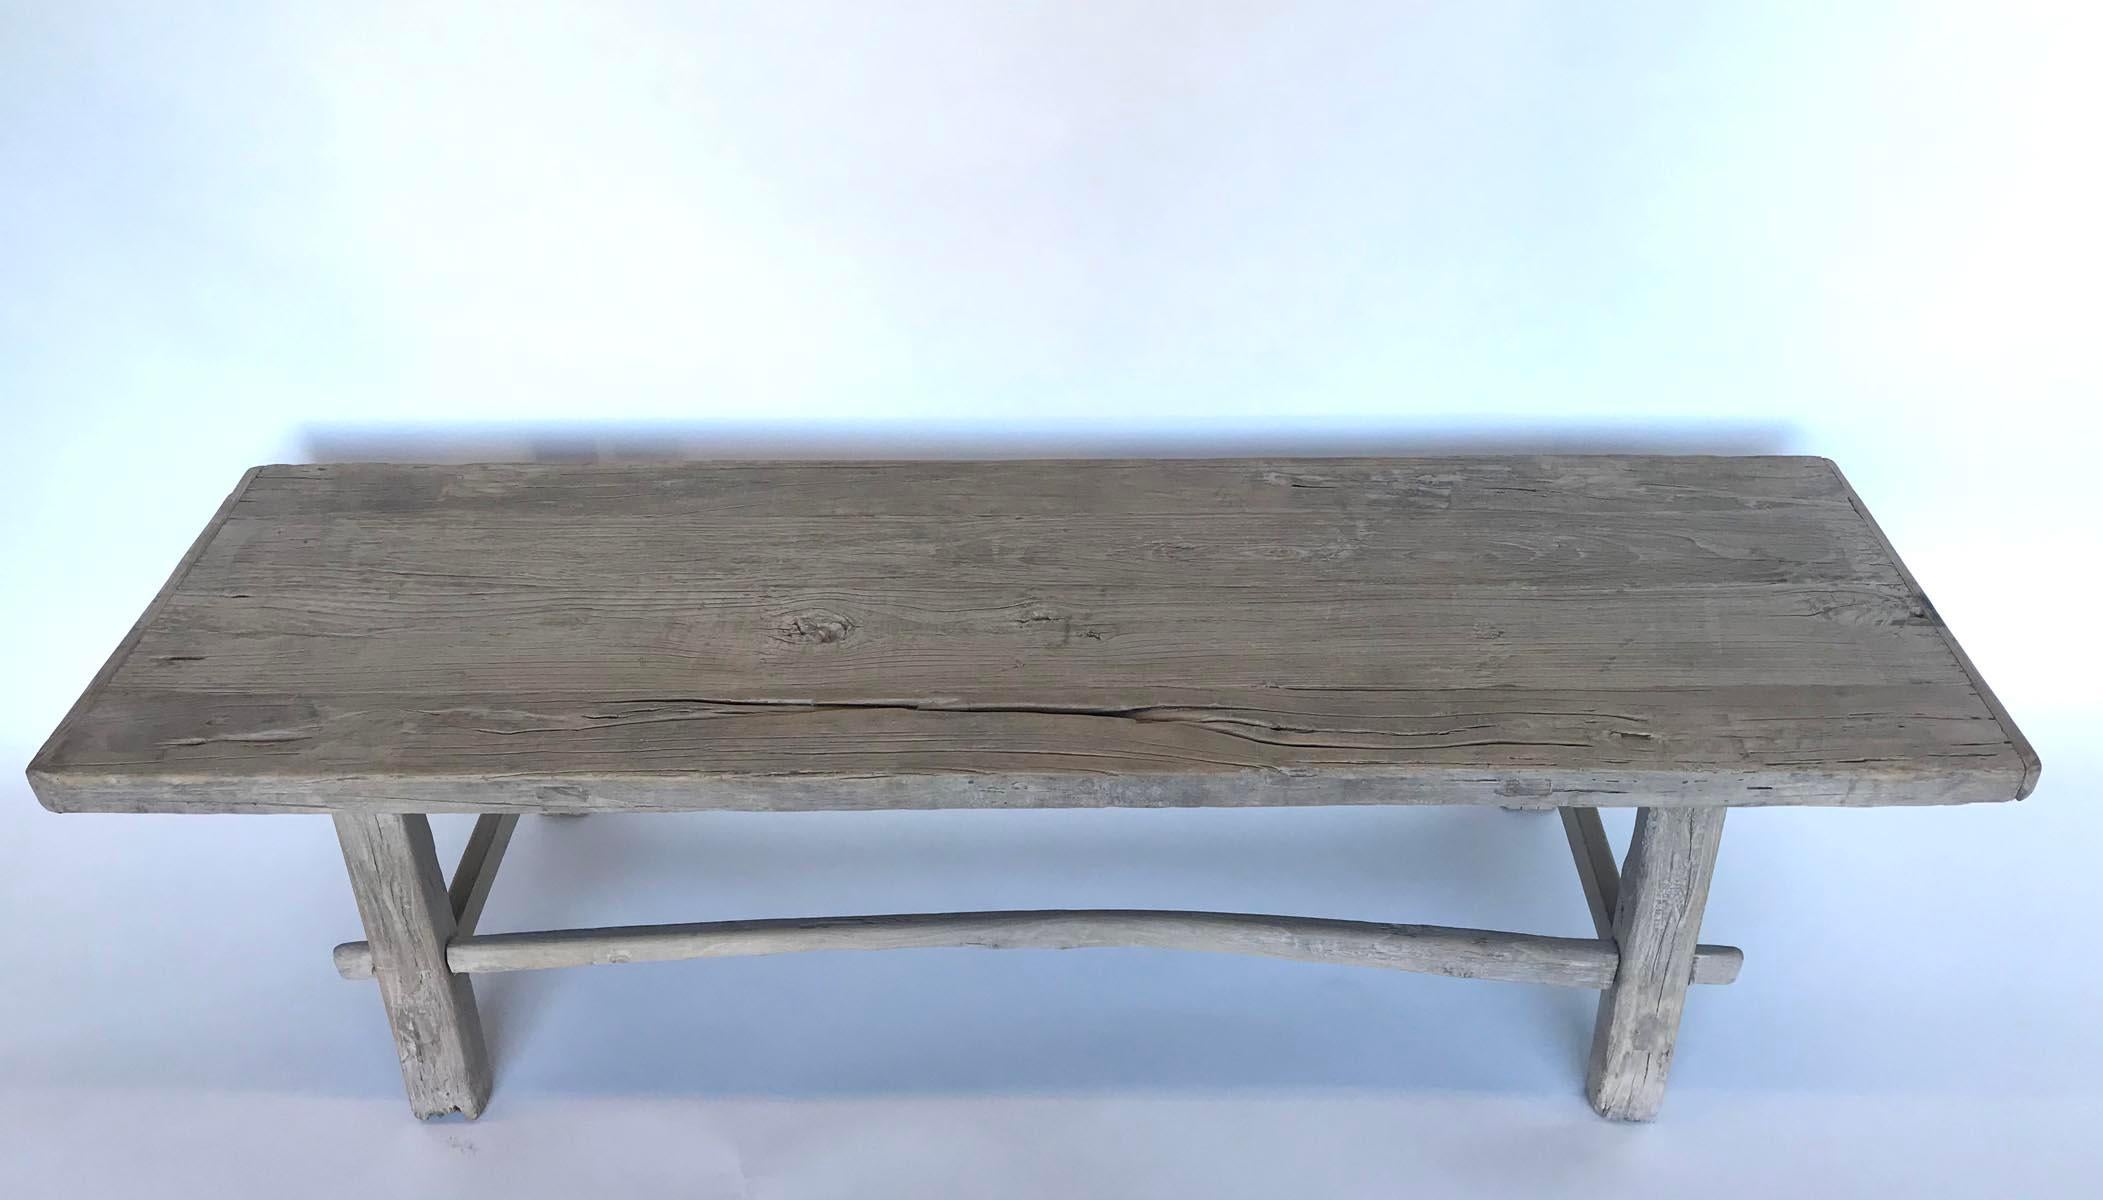 Vintage rustic Chinese Elm bench with one curved and one straight stretcher. Mortise and tenon construction. Wood is weathered with a grayish beige color, see close ups. Could work as a bench or as a skinny coffee table.